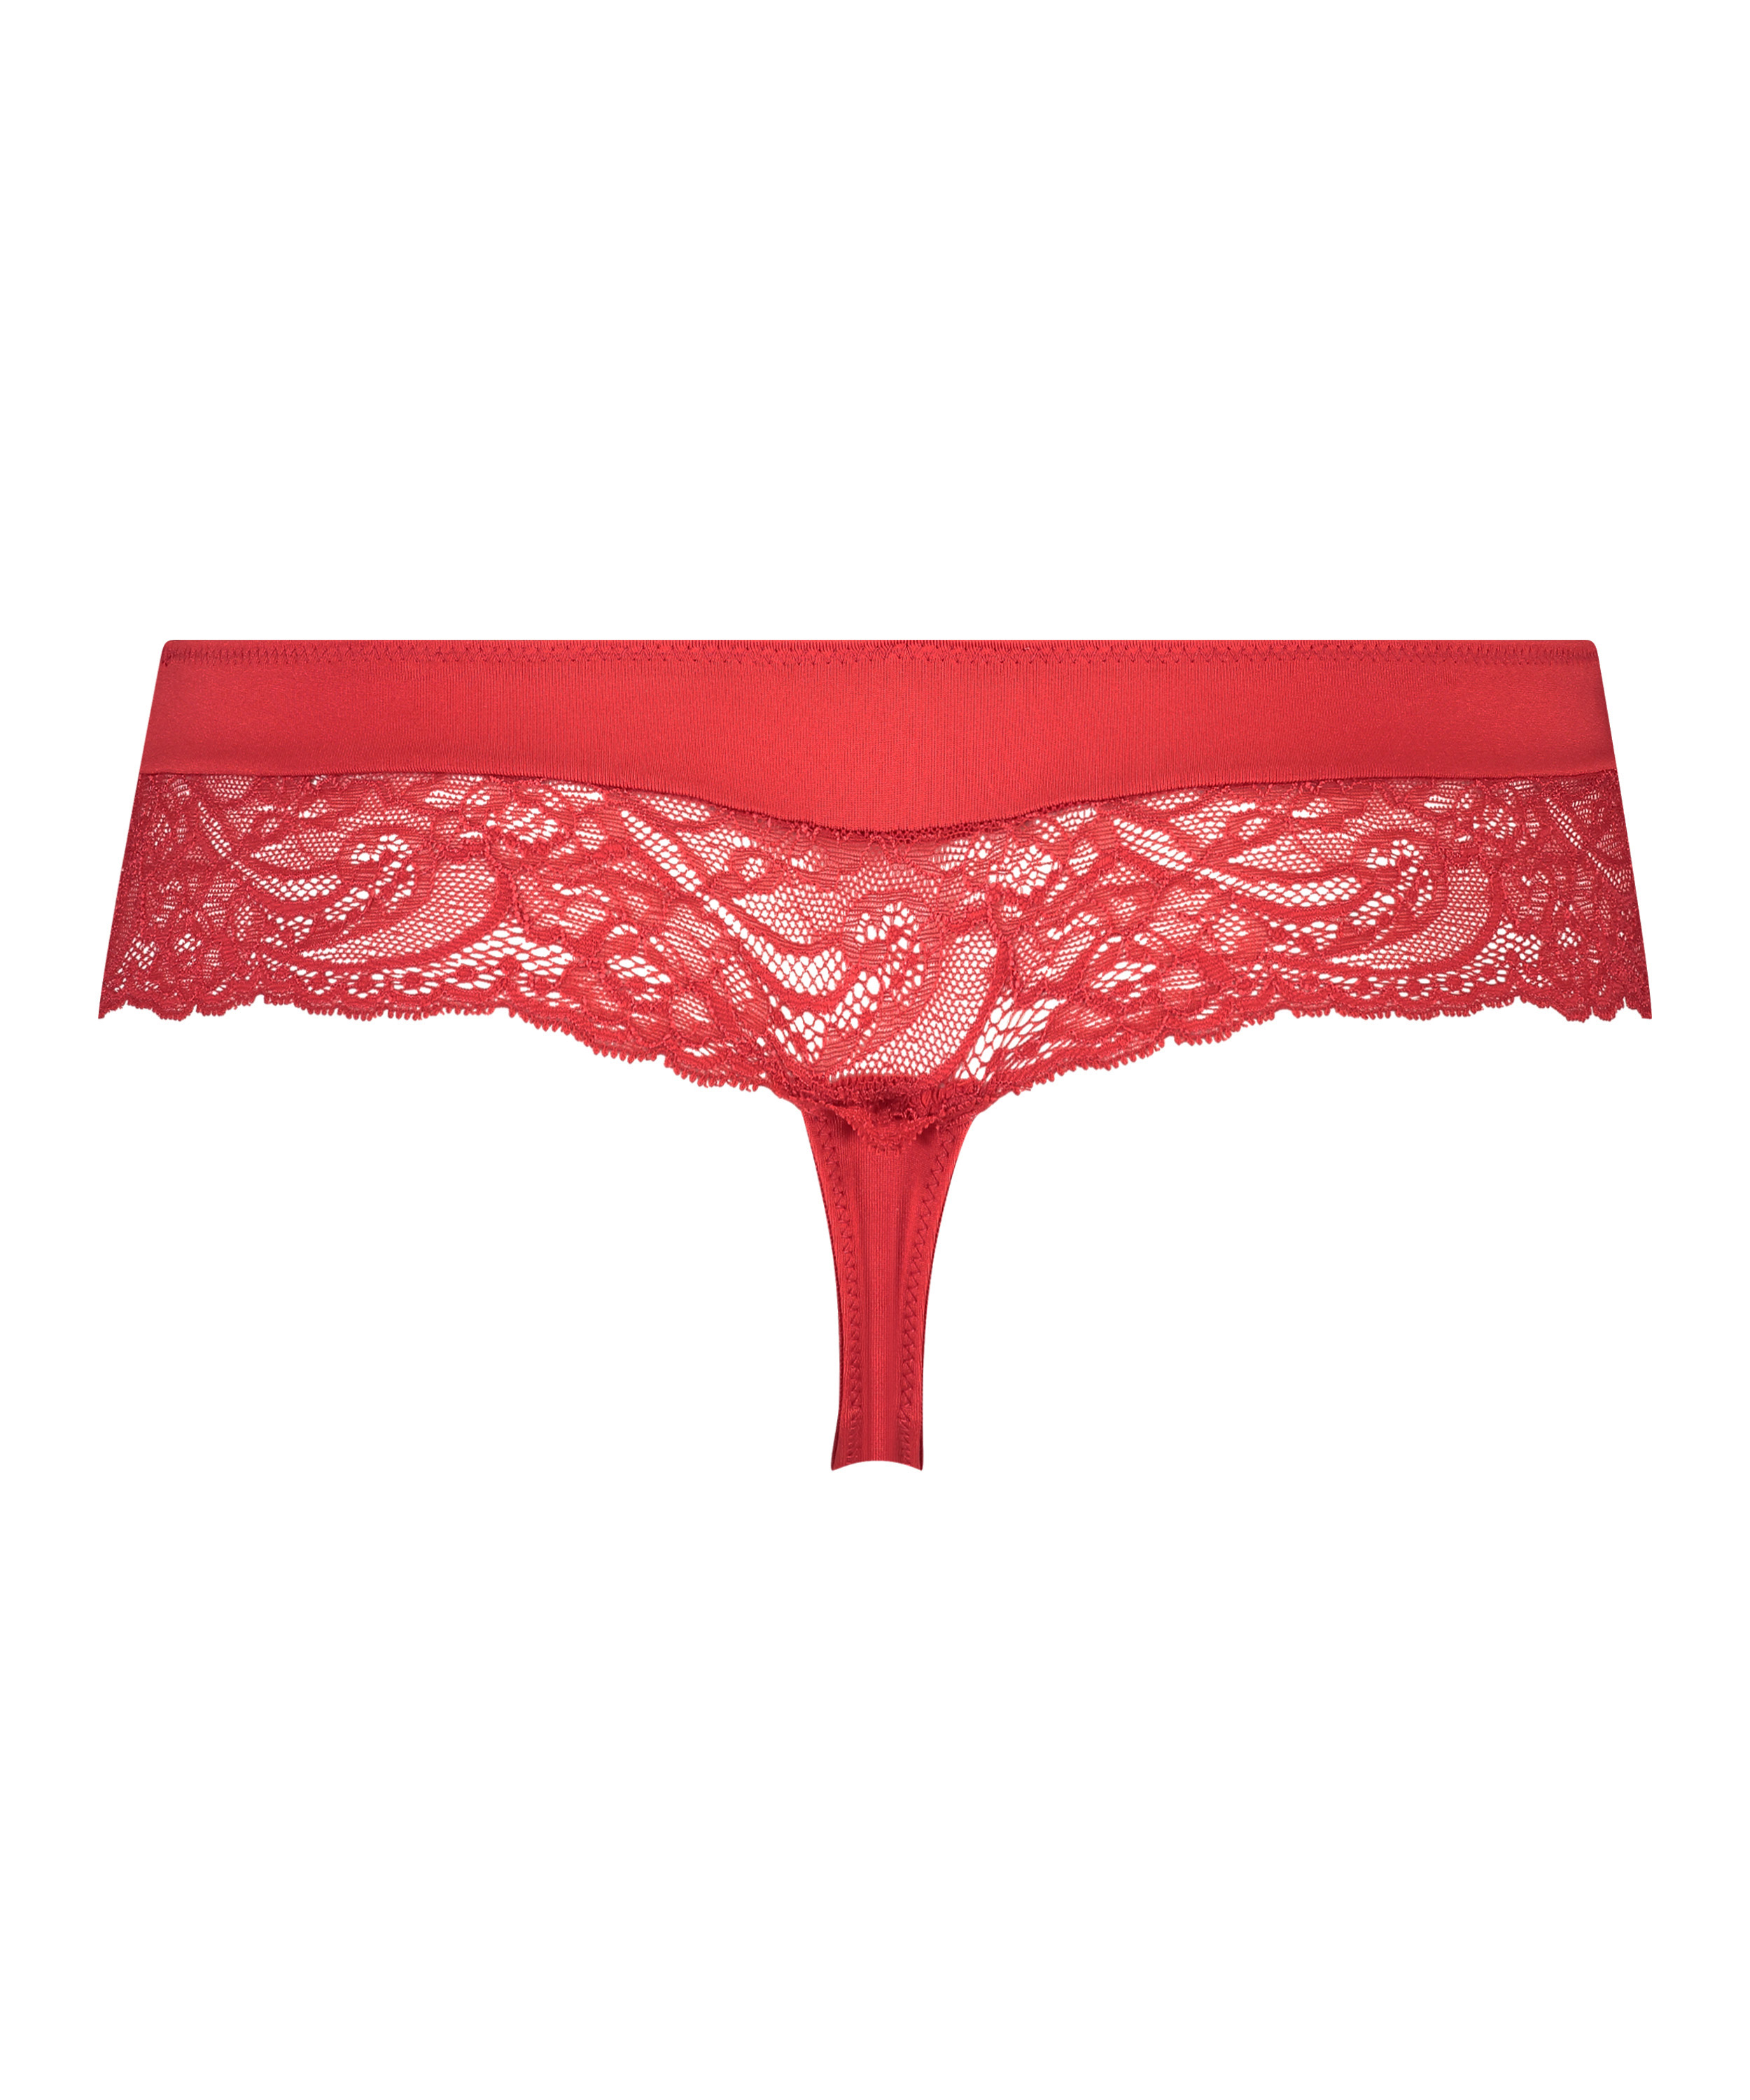 Boxerstring Sophie, Rood, main